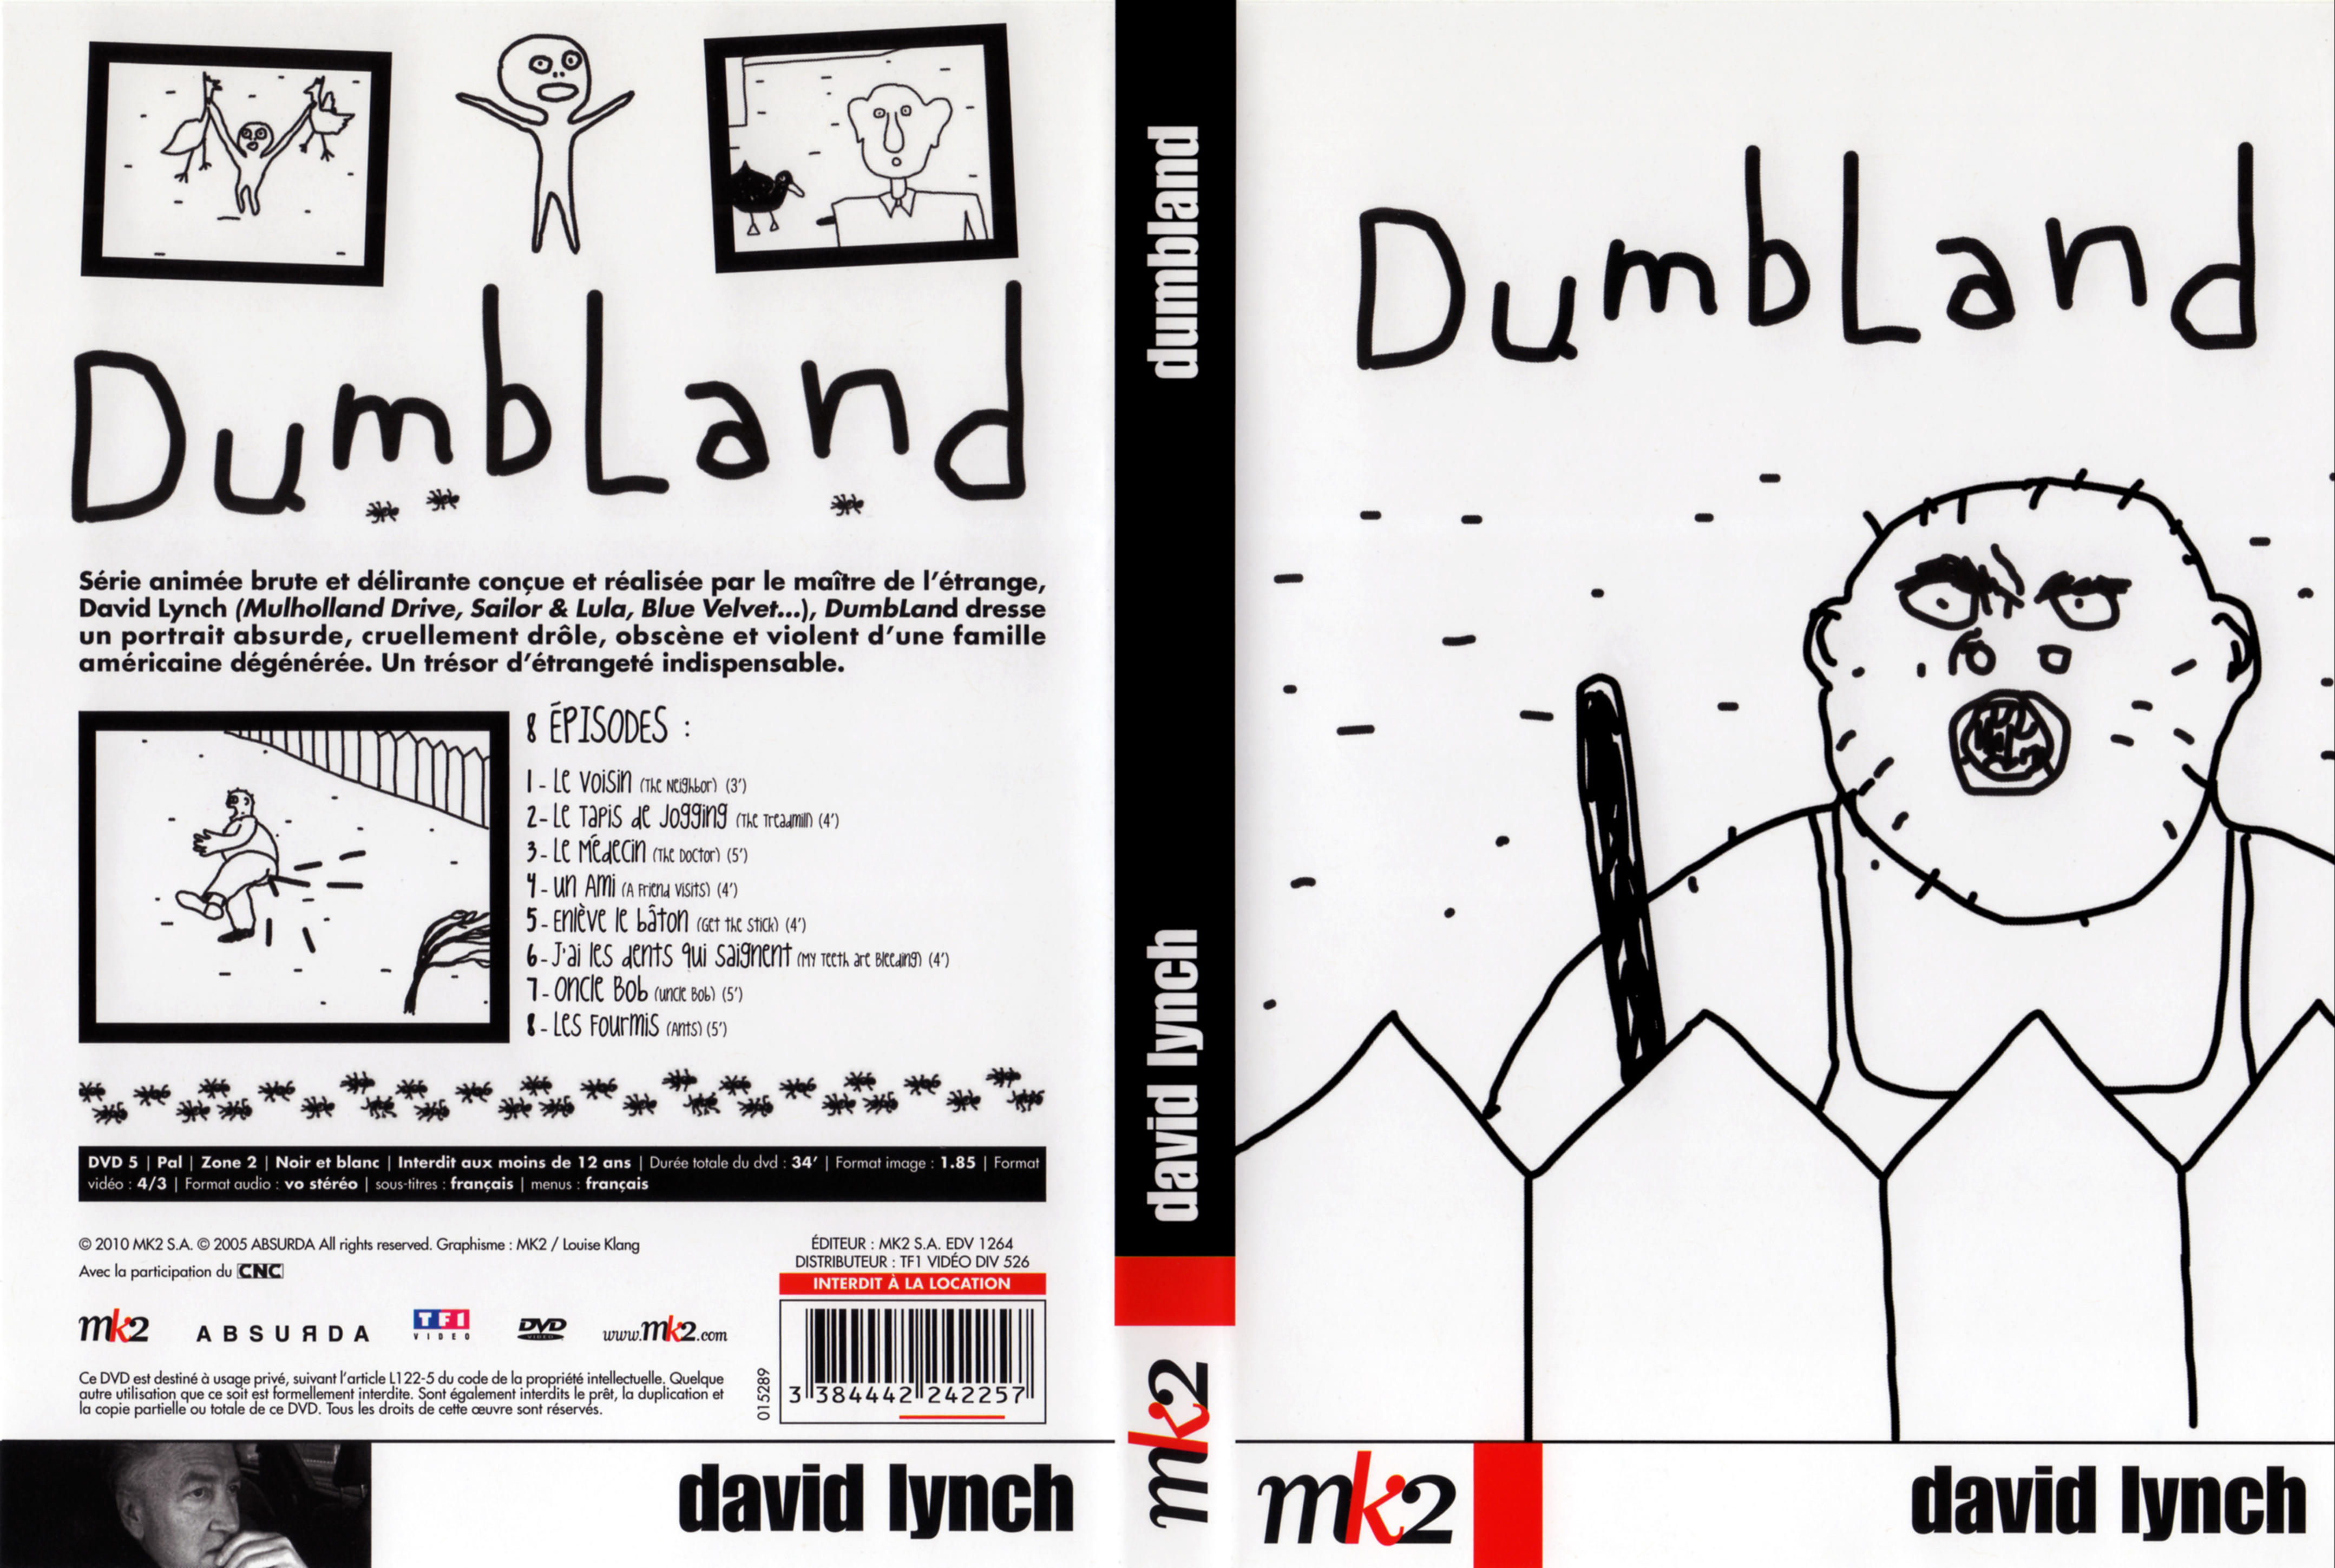 Jaquette DVD Dumbland